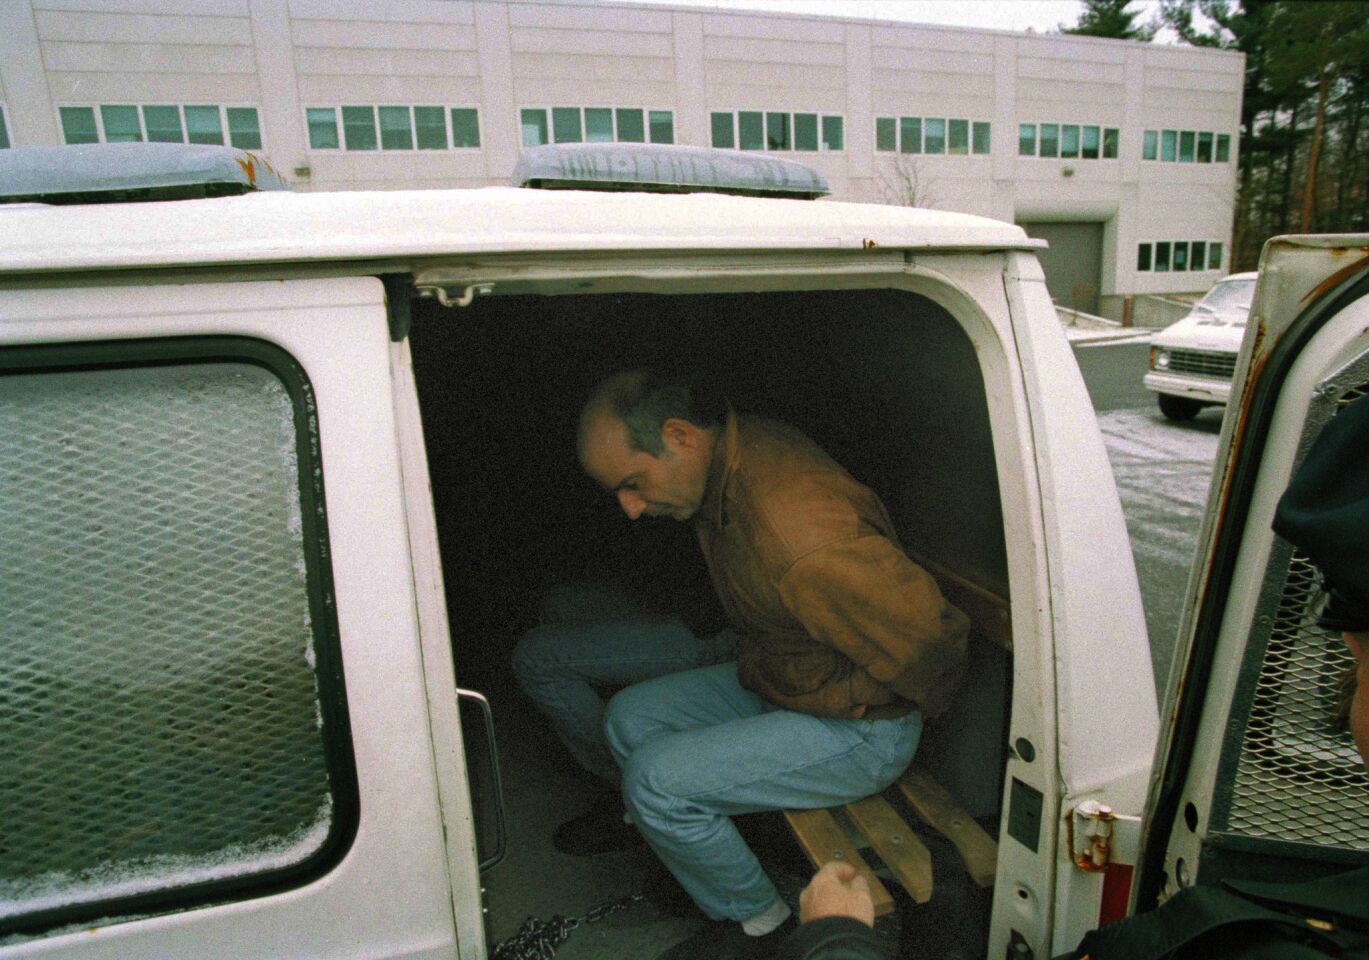 John Esposito sits handcuffed in a van in Hauppauge, N.Y., as he is about to be taken to court for arraignment on charges of kidnapping Katie Beers.